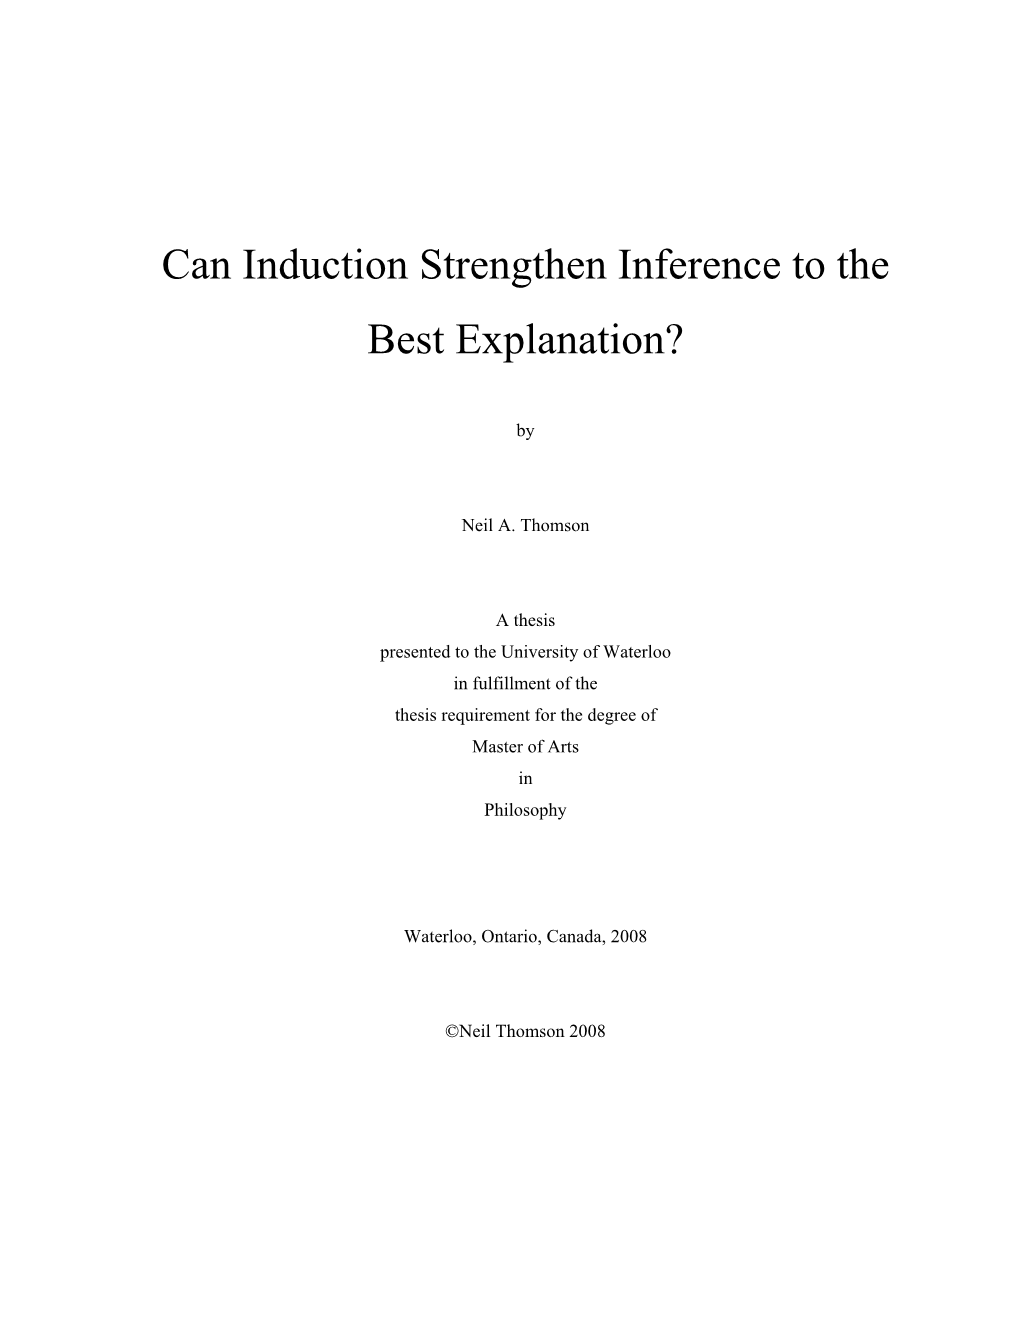 Can Induction Strengthen Inference to the Best Explanation?